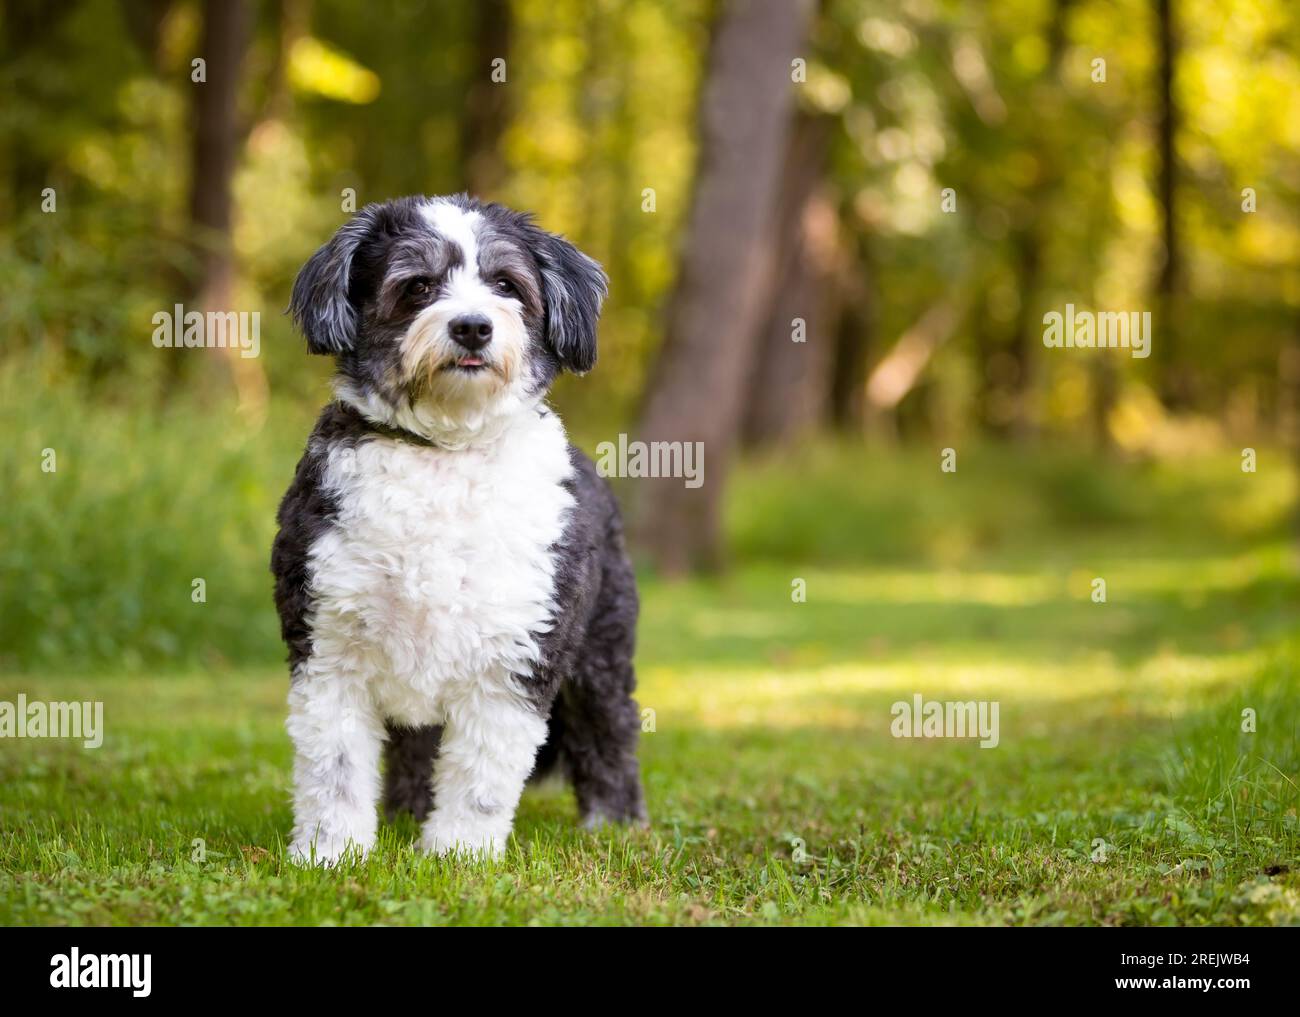 A black and white Shih Tzu x Poodle mixed breed dog looking at the camera Stock Photo